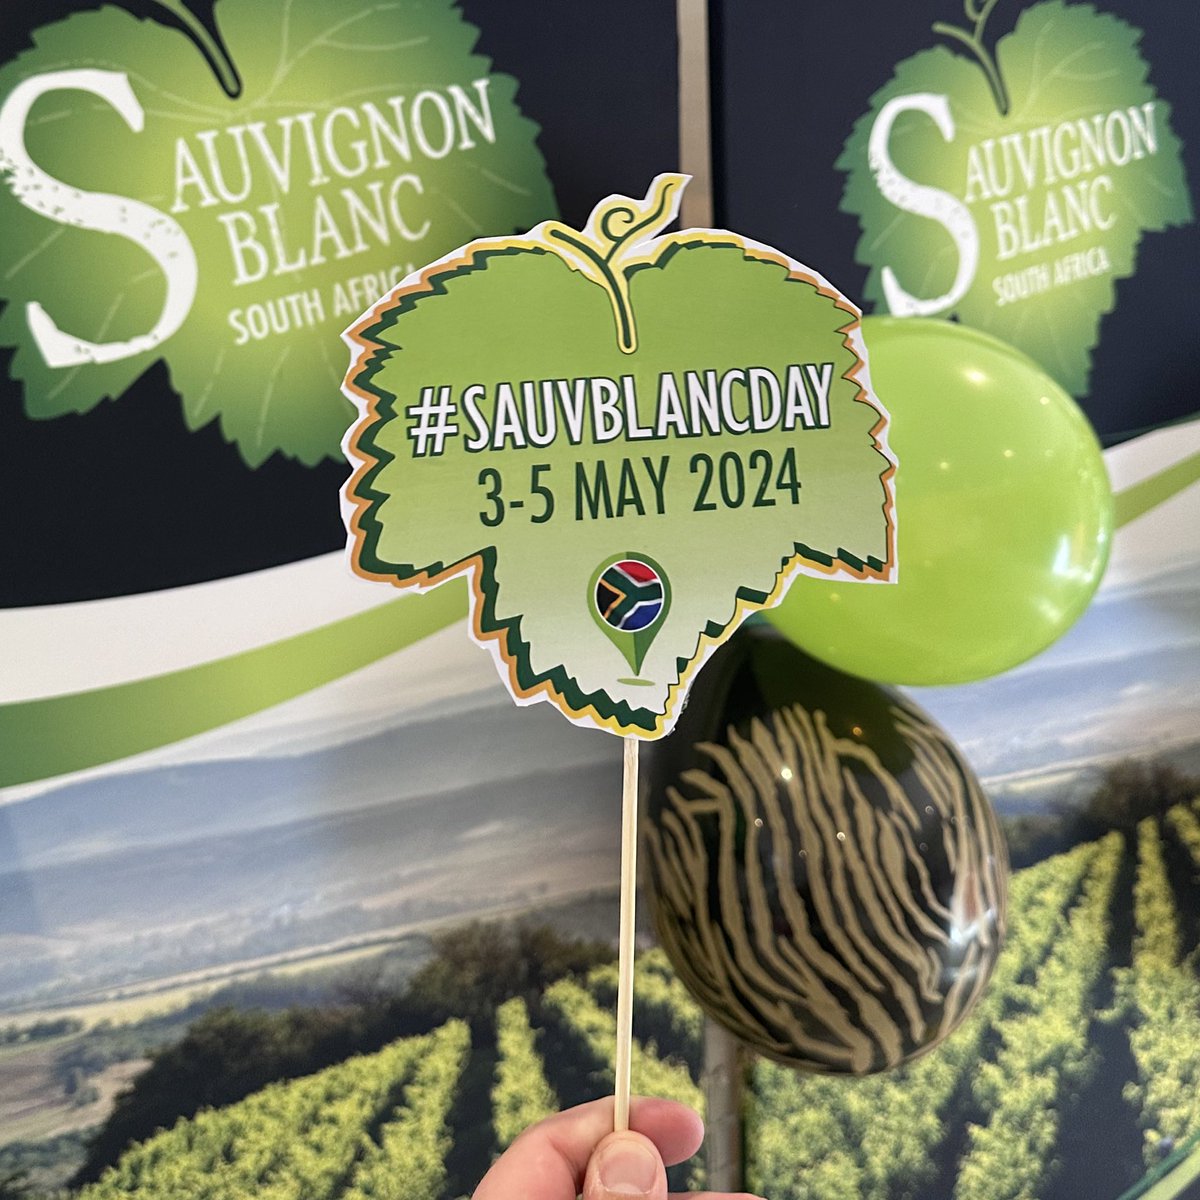 Today, the Stellenbosch Bowls Club forms the backdrop for the start of the #SauvBlancDay celebrations 🎉 Ready, steady, bowl! @SauvignonSA